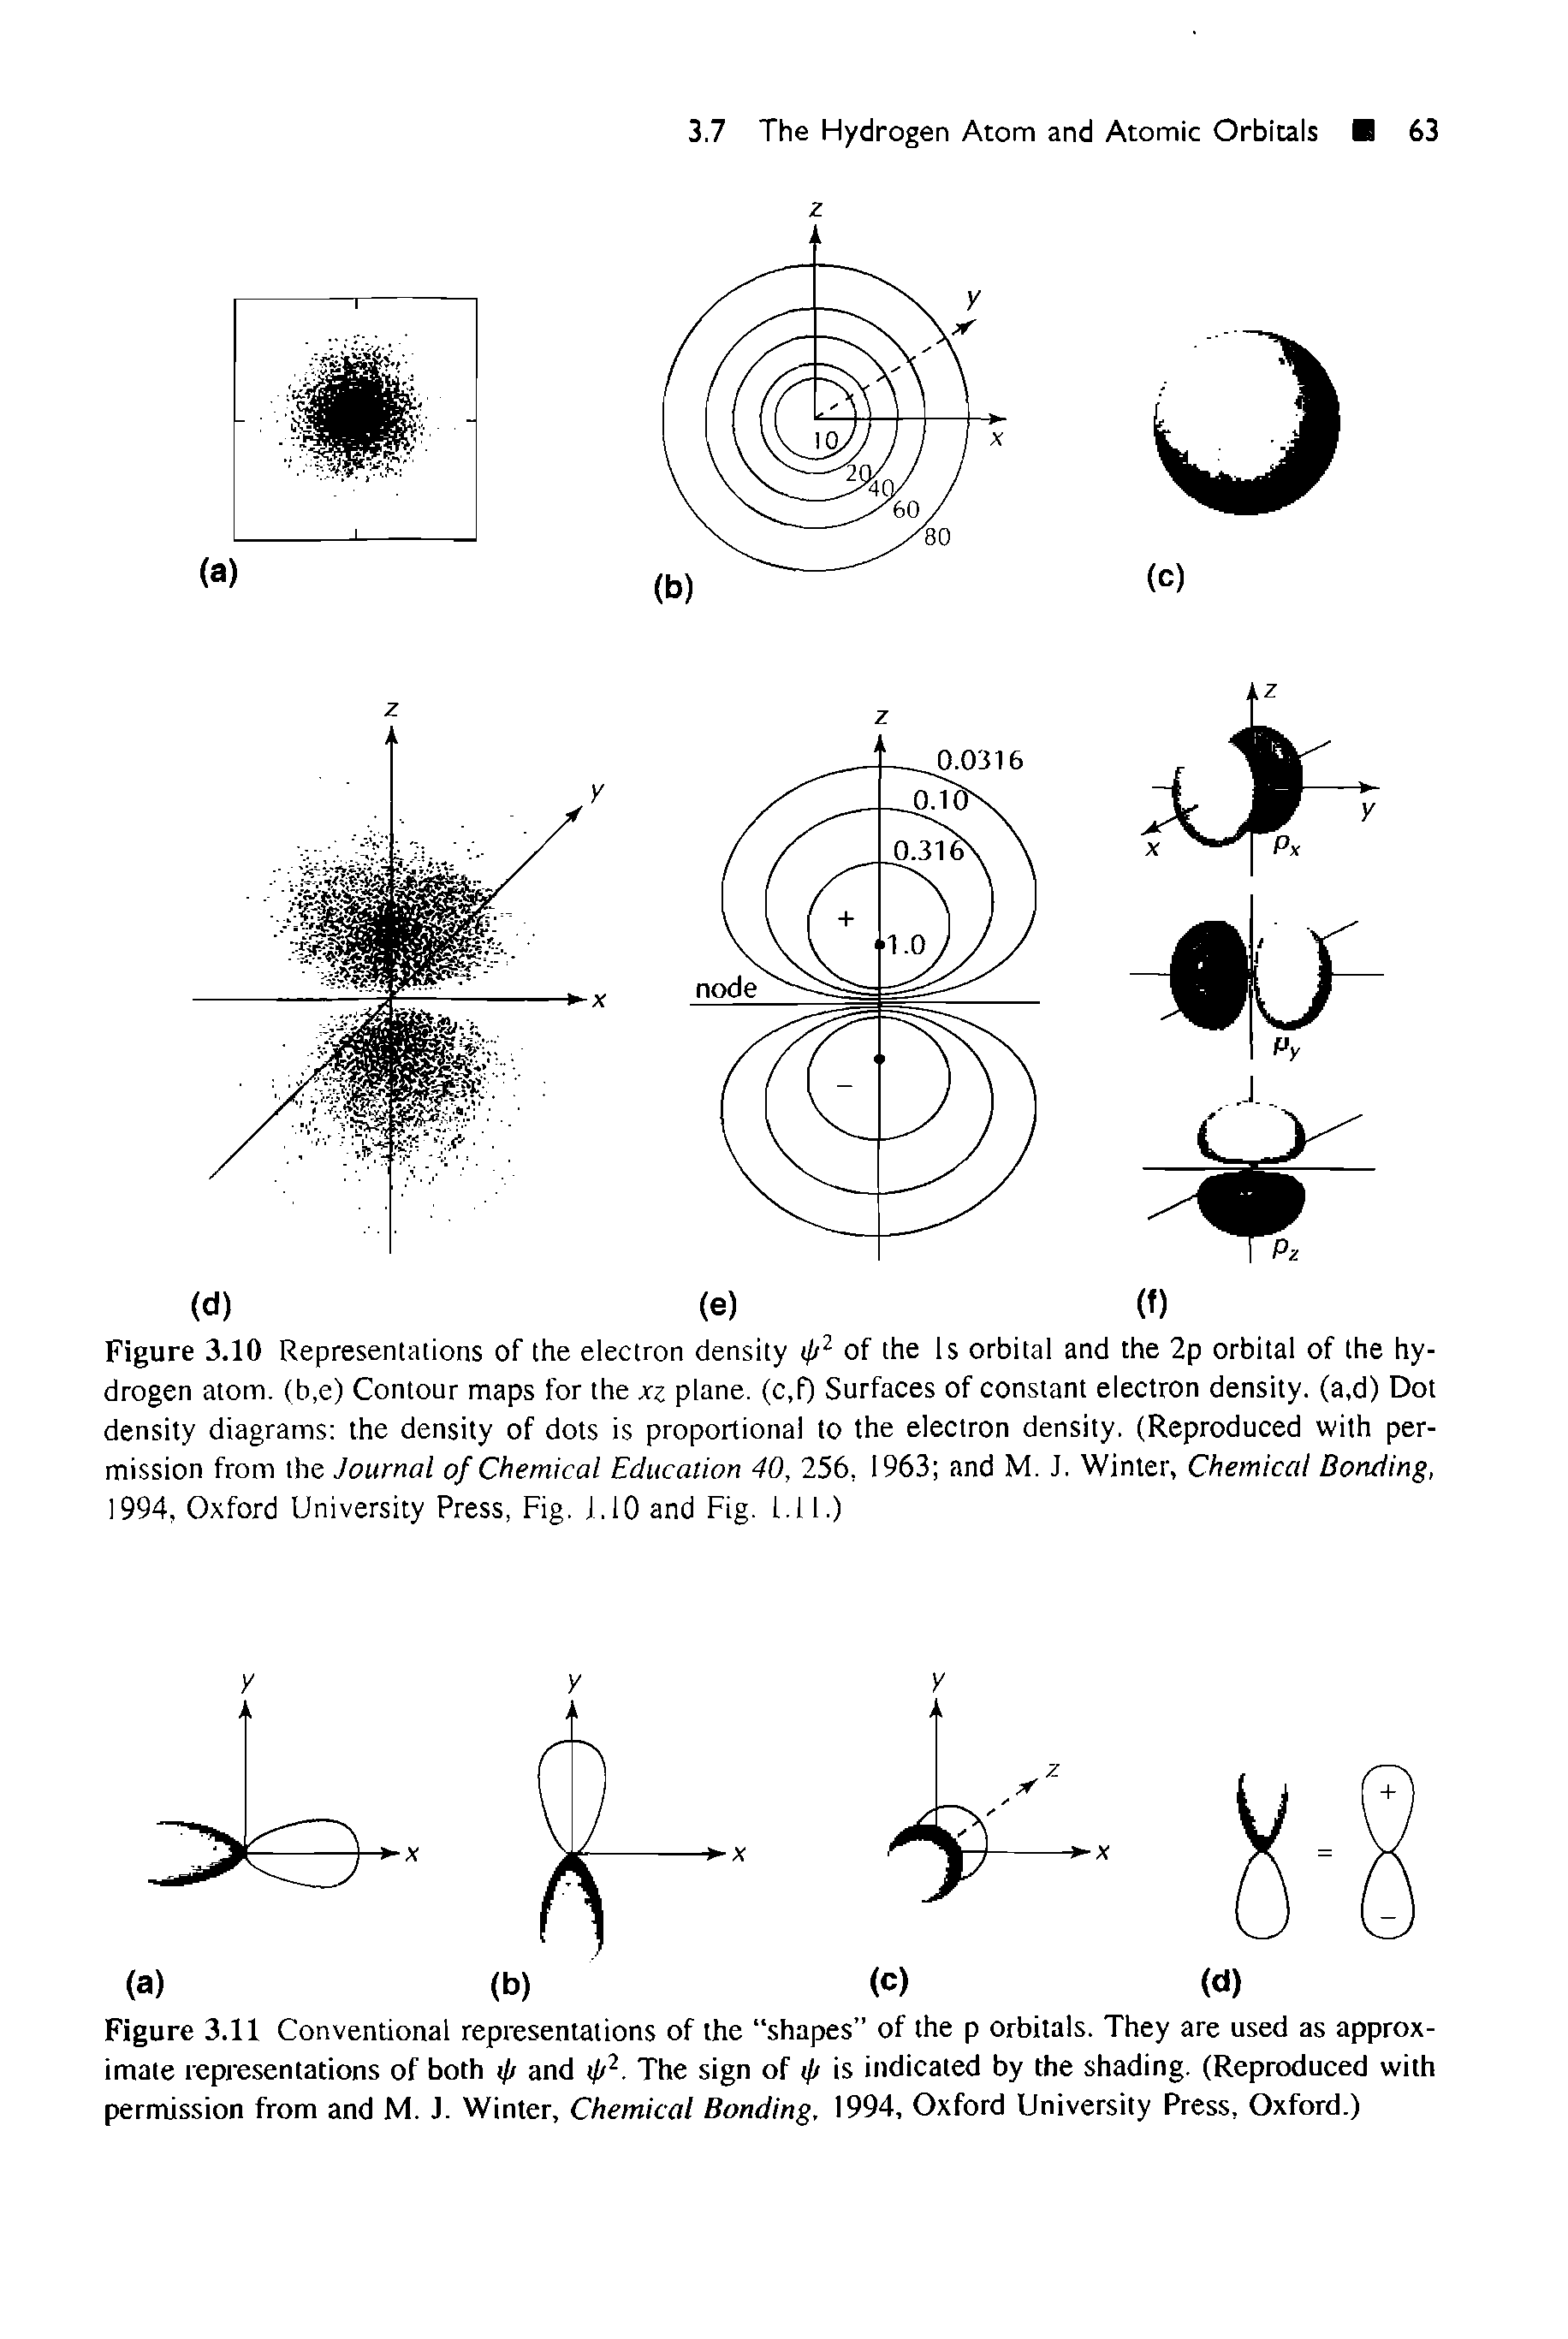 Figure 3.11 Conventional representations of the shapes of the p orbitals. They are used as approximate representations of both ip and tp2. The sign of tp is indicated by the shading. (Reproduced with permission from and M. J. Winter, Chemical Bonding, 1994, Oxford University Press, Oxford.)...